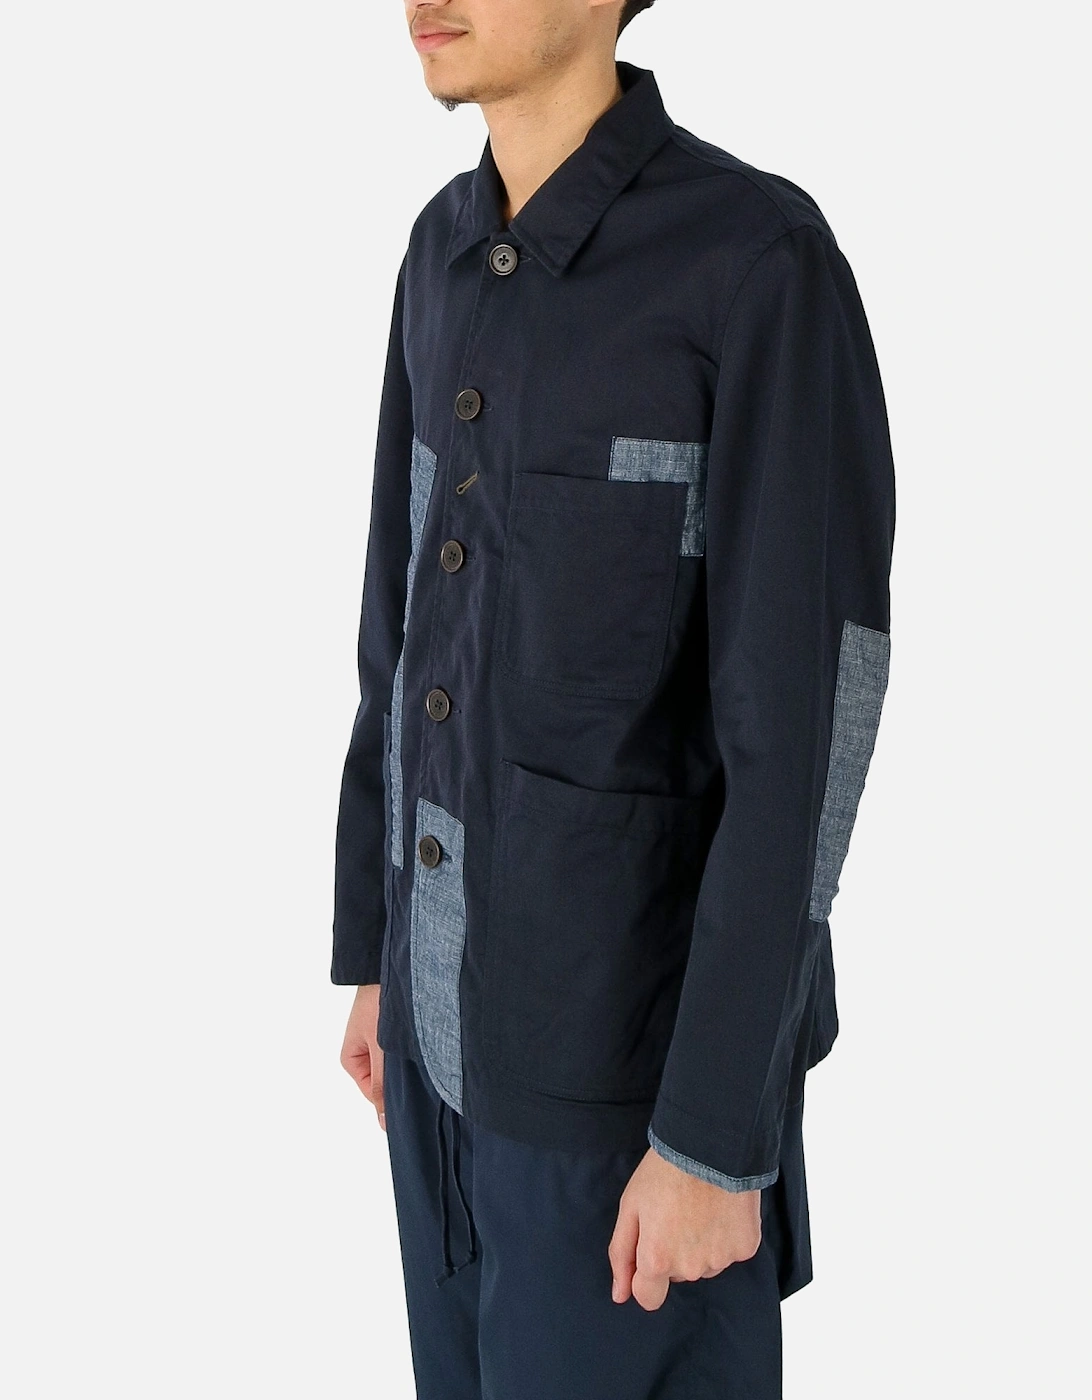 Patched Bakers Chambray Patch Navy Jacket